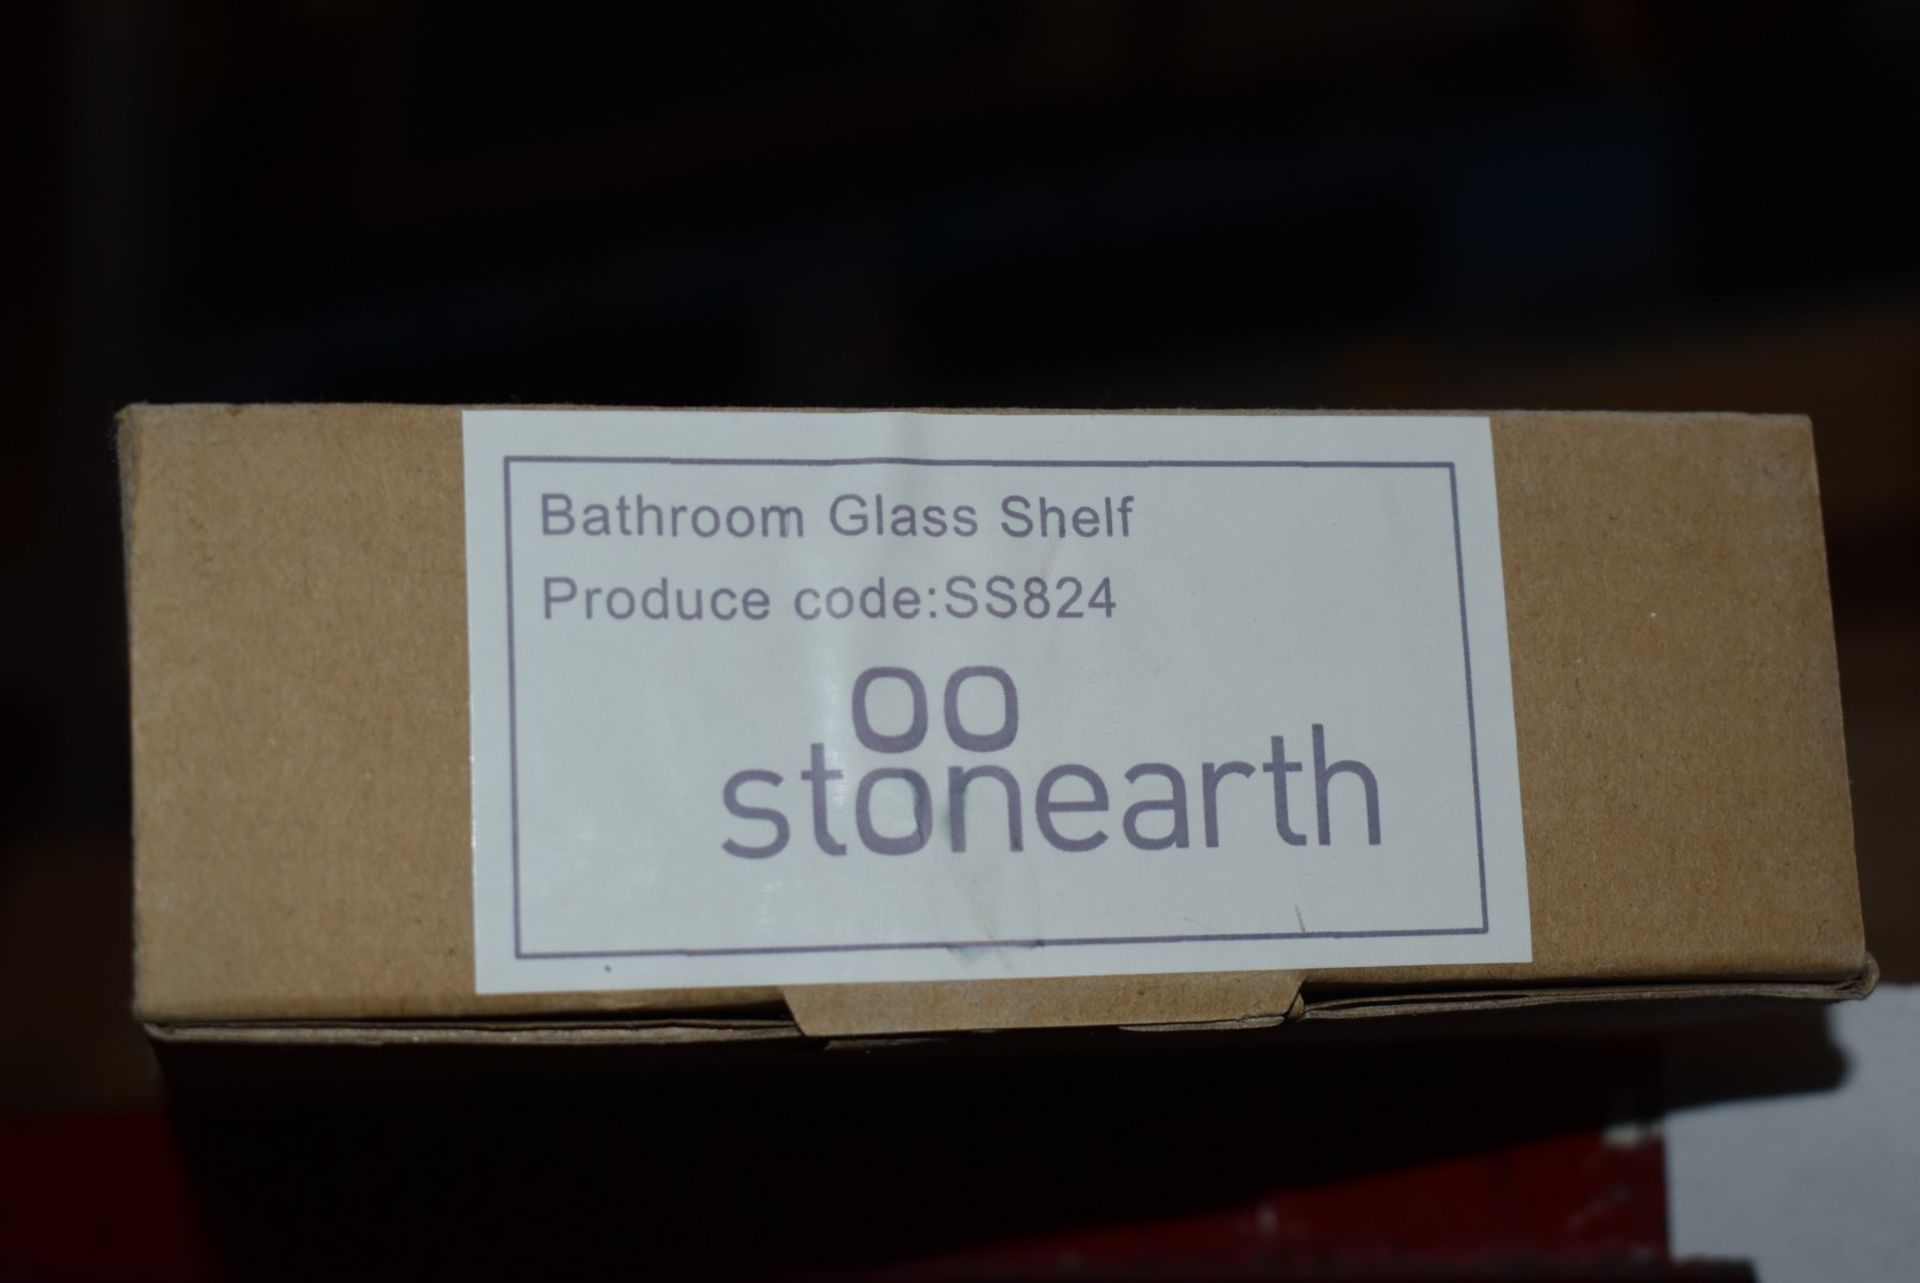 1 x Stonearth Glass Wall Mounted Shelf With Gallery Rail - Solid Stainless Steel Bathroom - Image 3 of 3